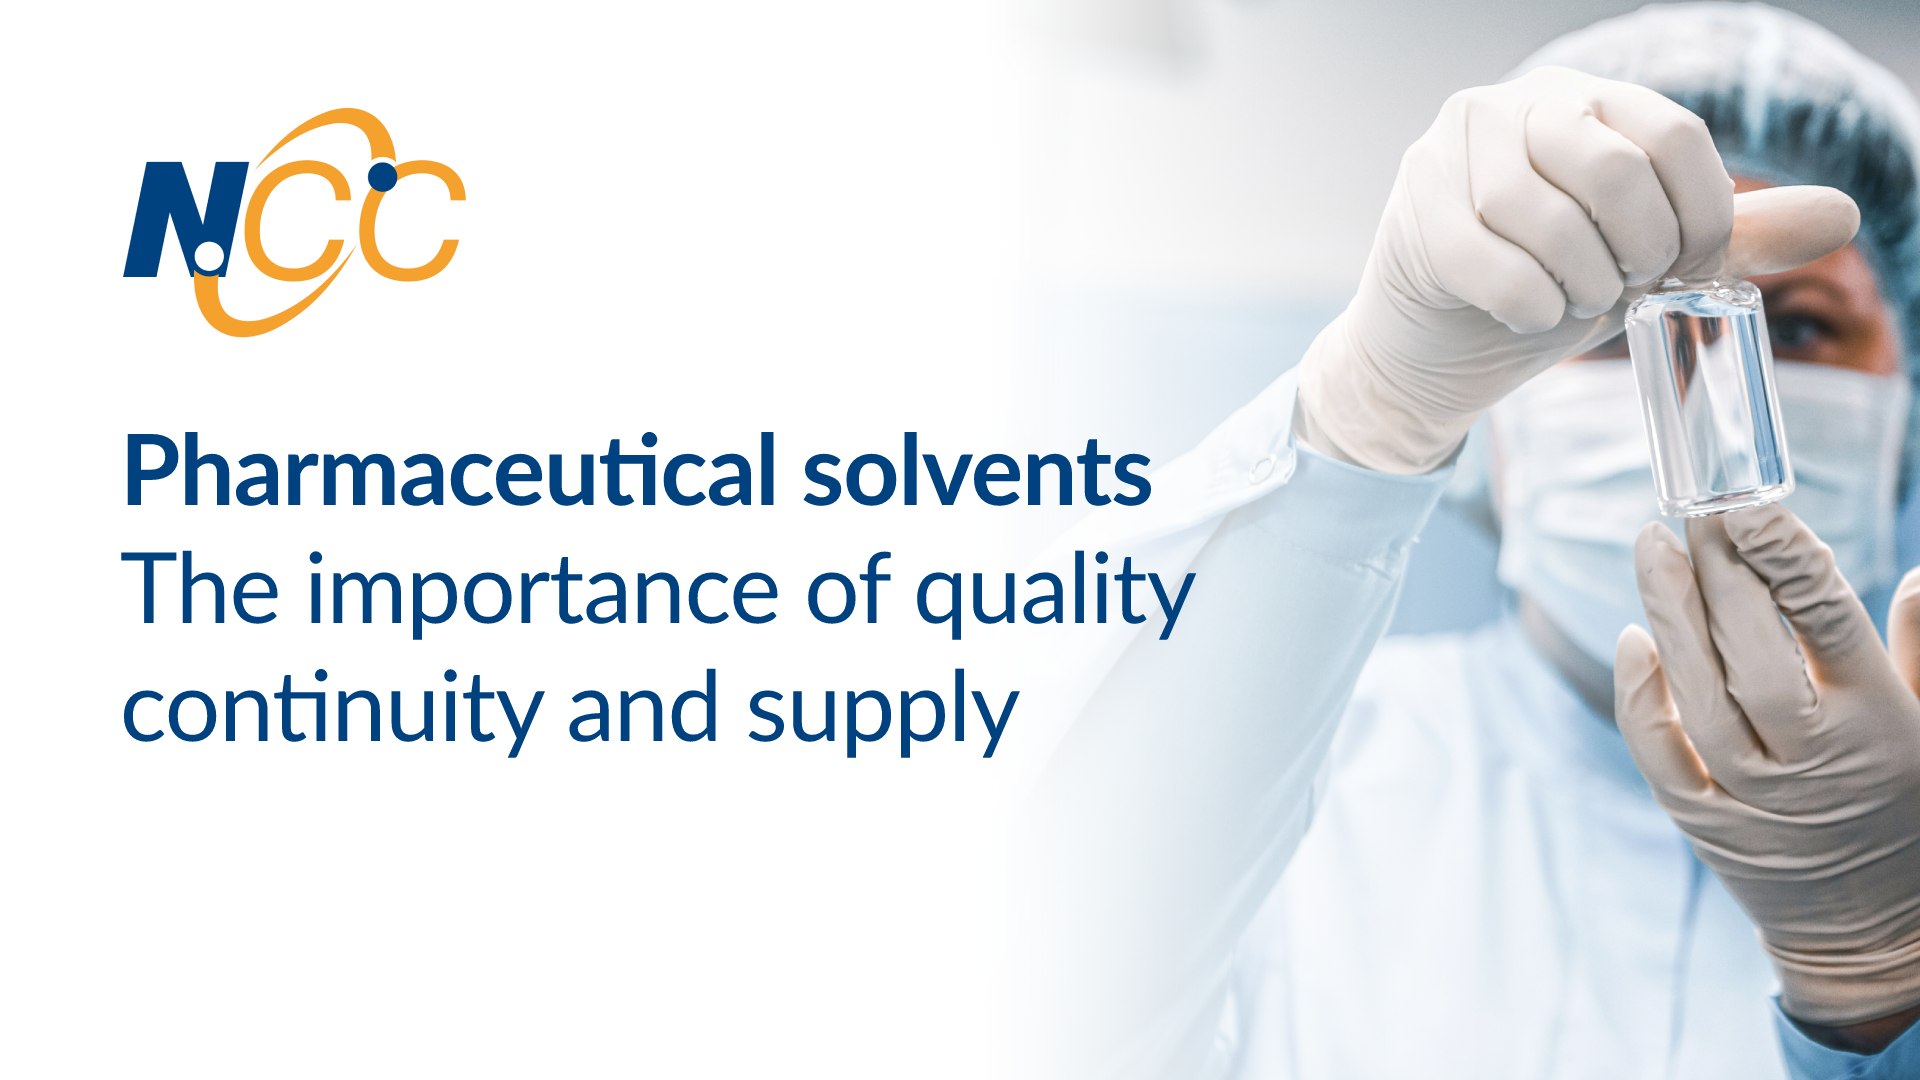 Pharmaceutical solvents - The importance of quality continuity and supply